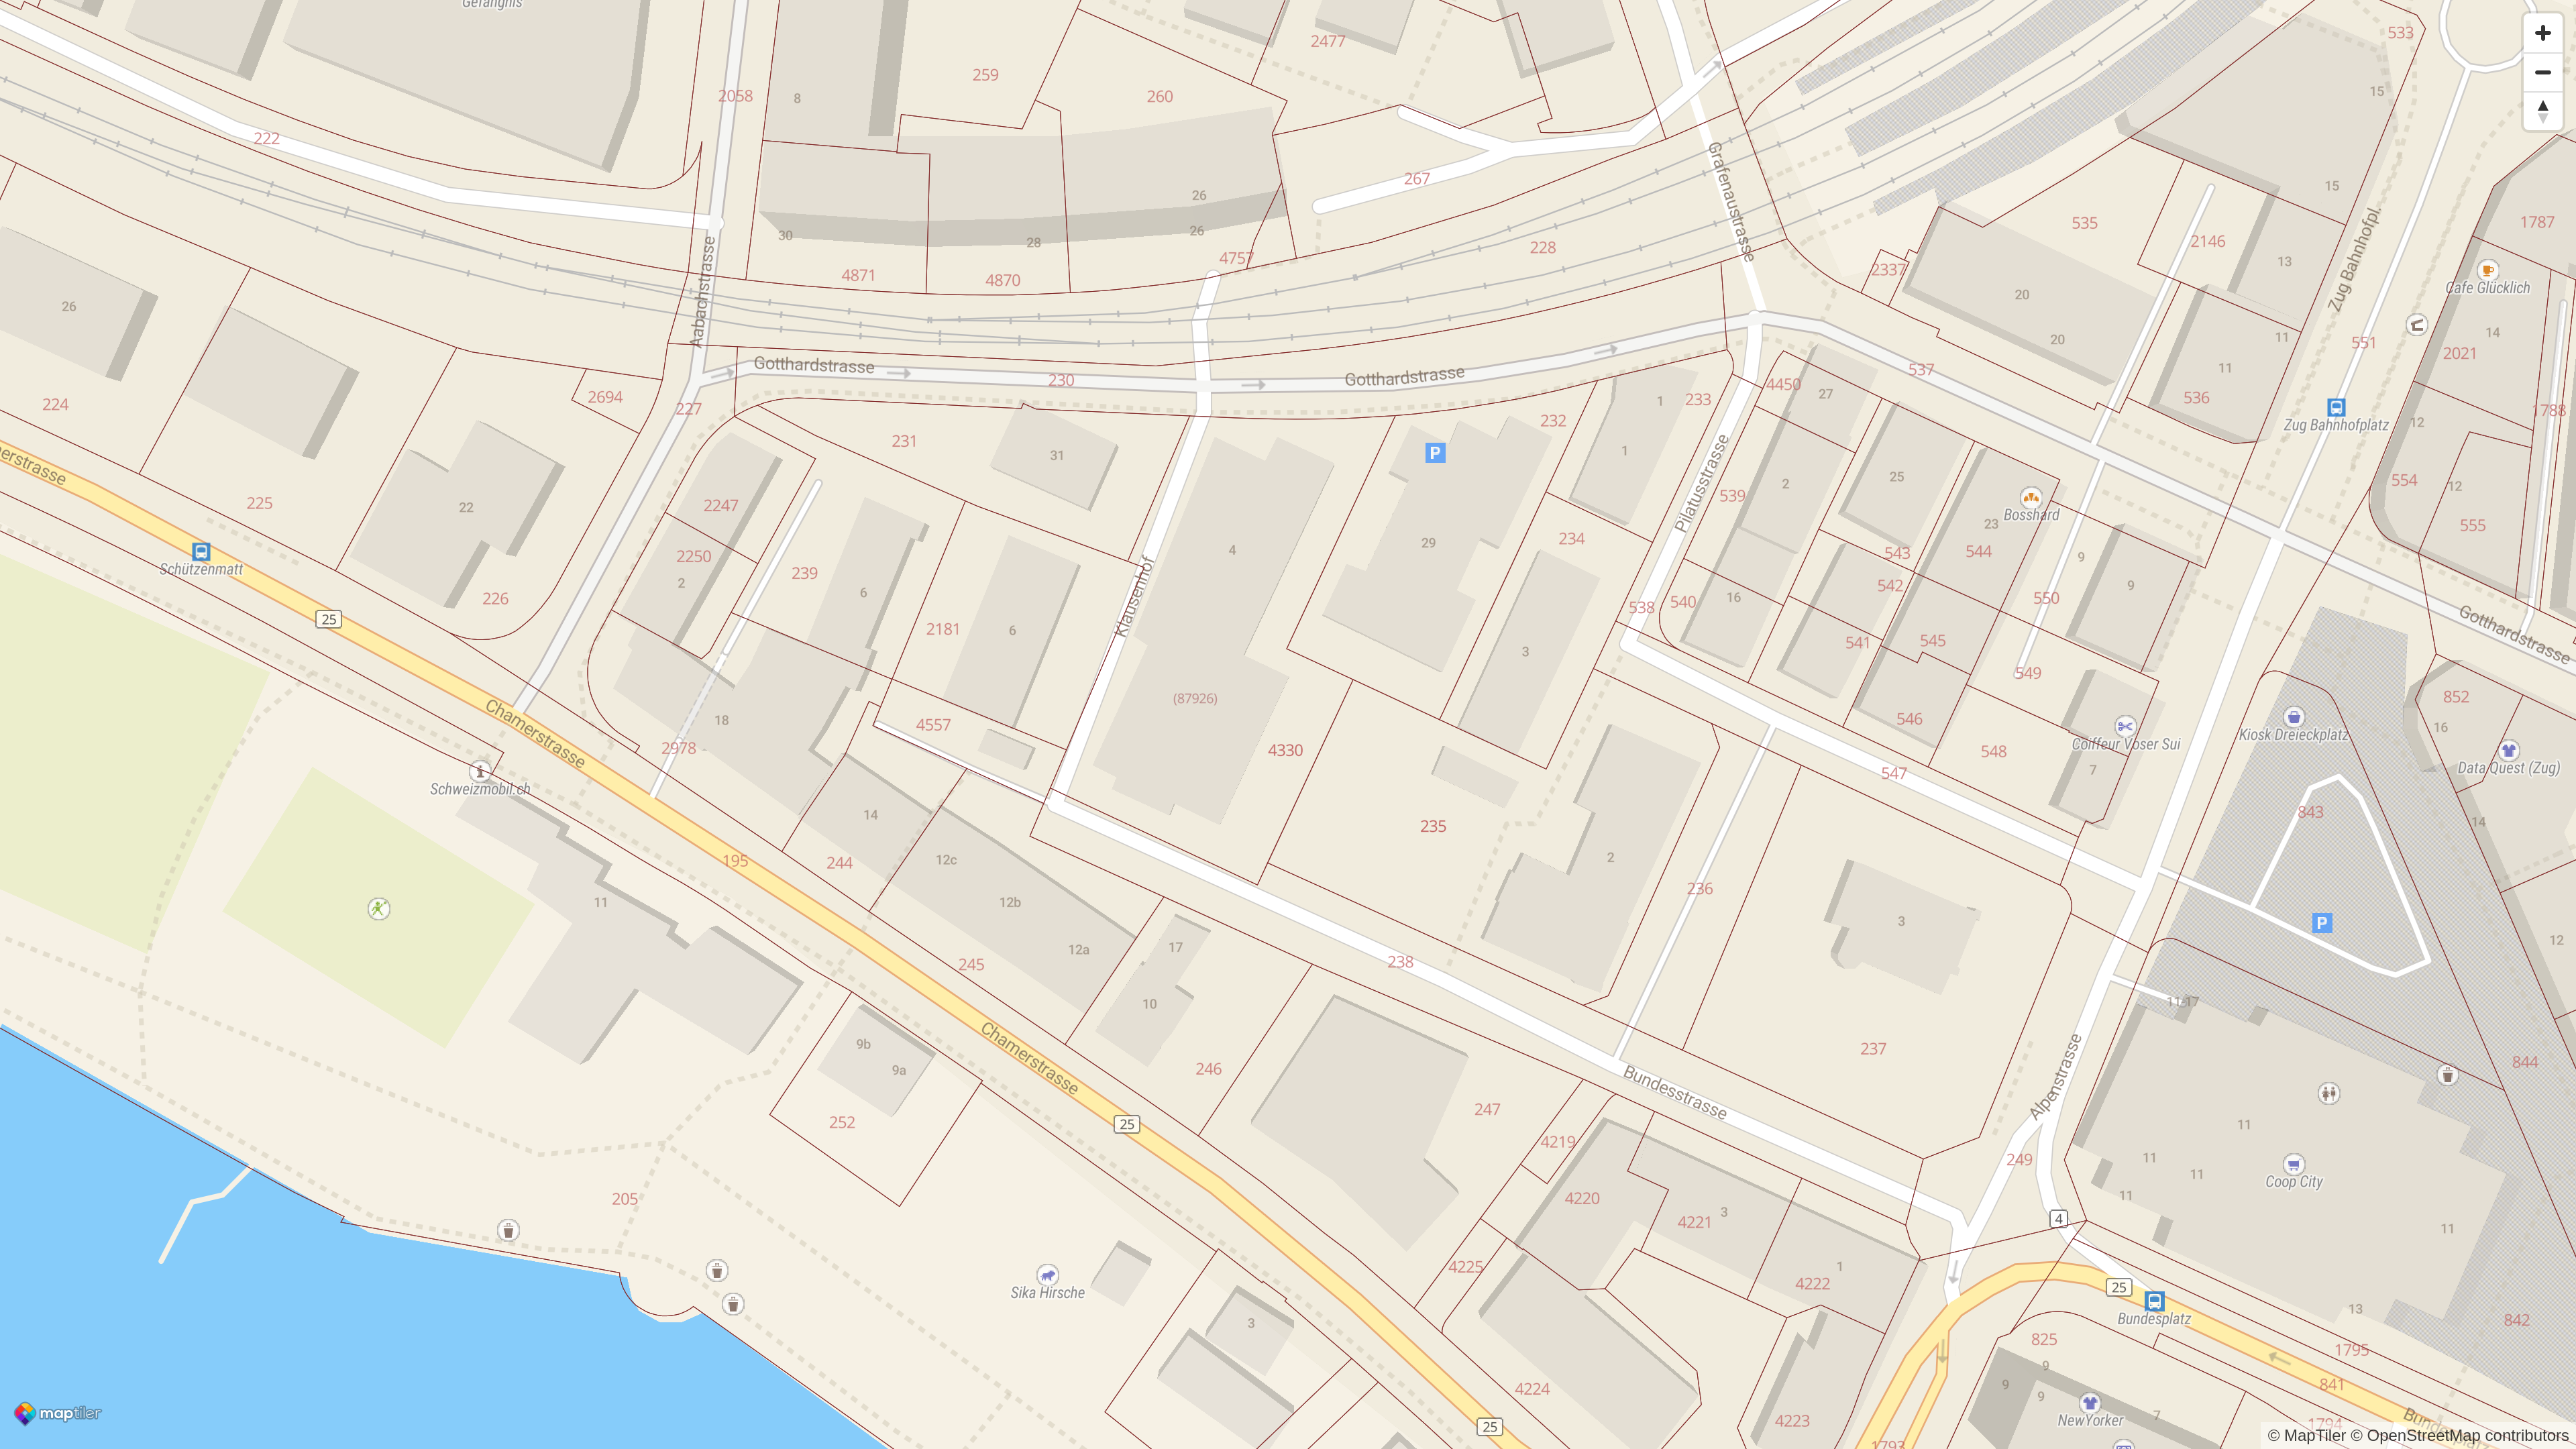 streets_cadastral_map_fullhd.png